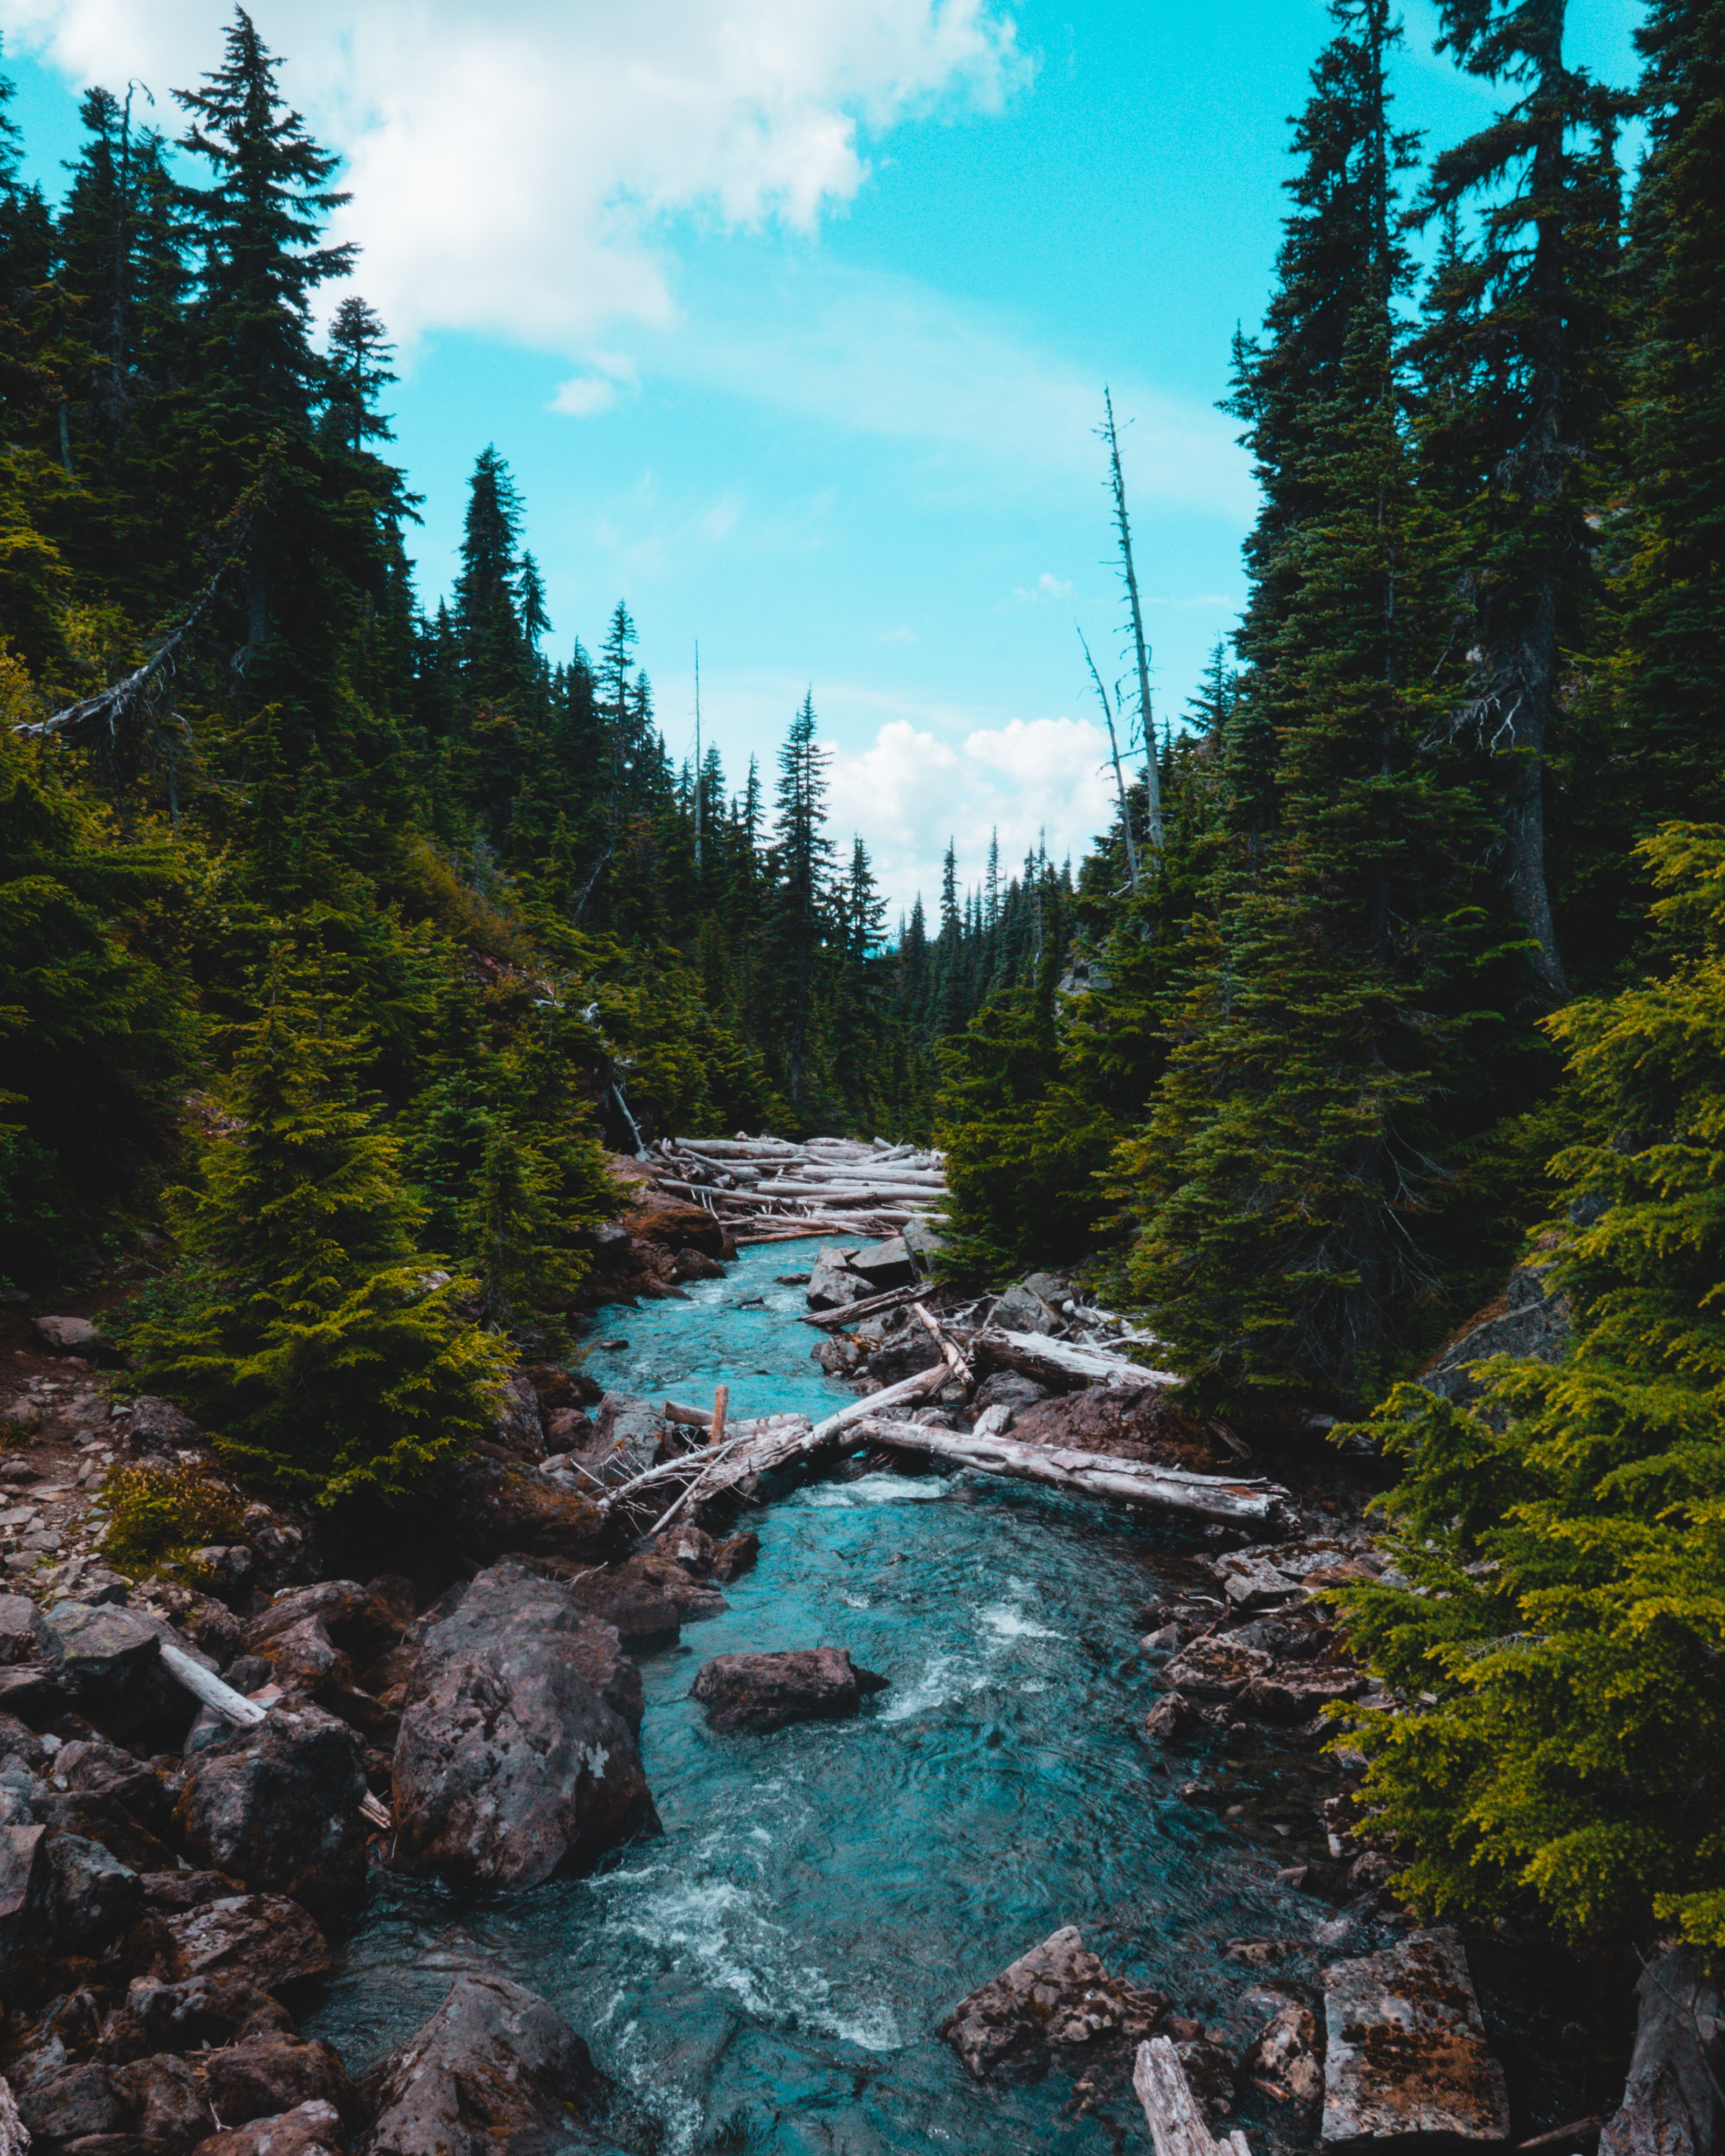 stones, forest, nature, rivers, flow, spruce, fir, stream